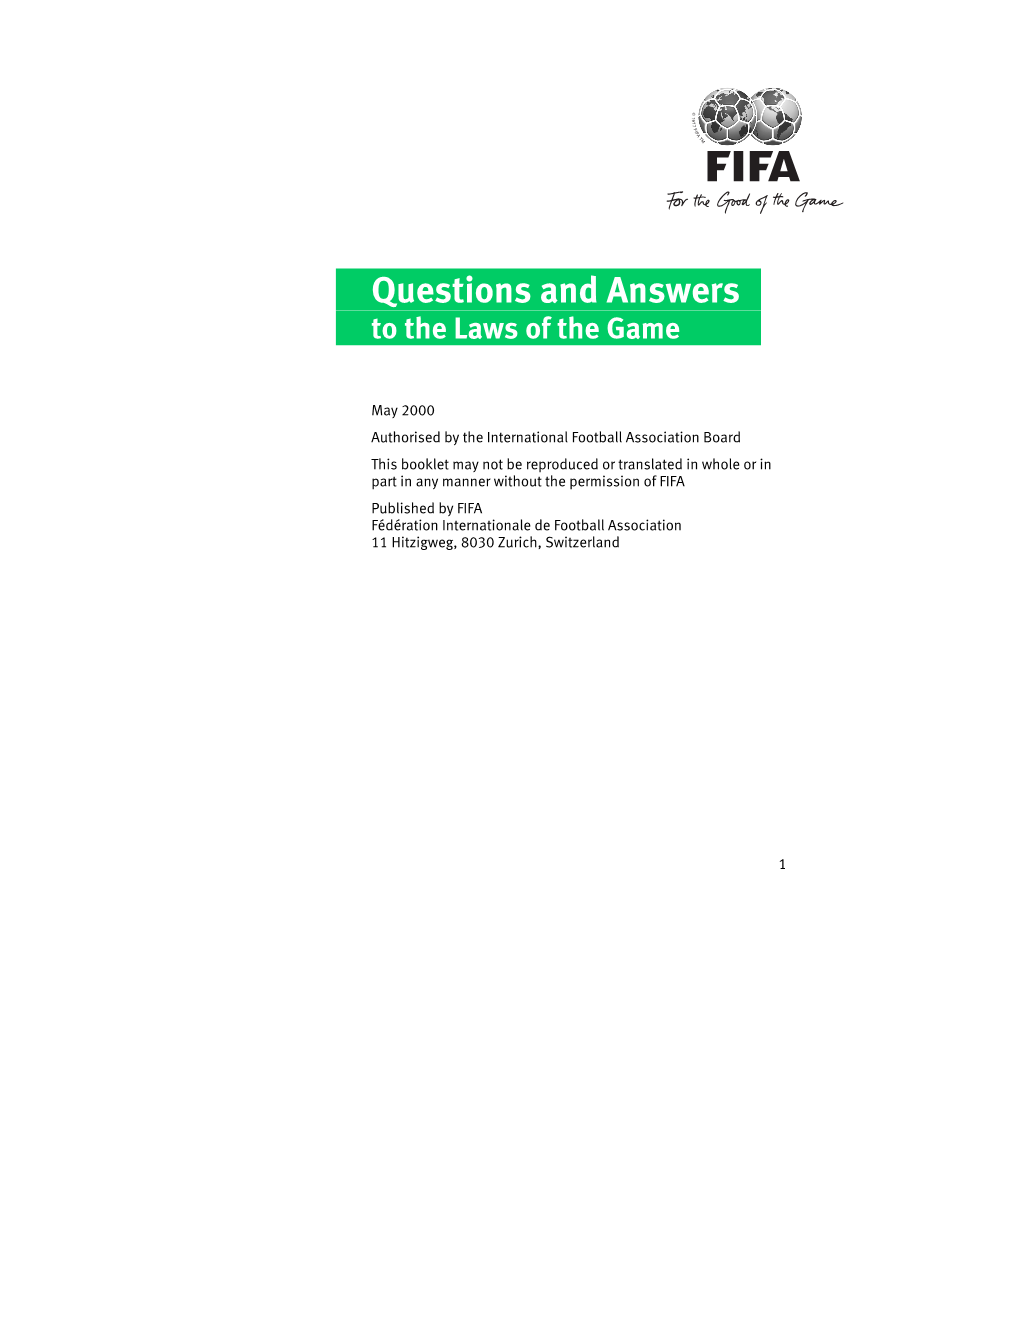 FIFA Questions and Answers